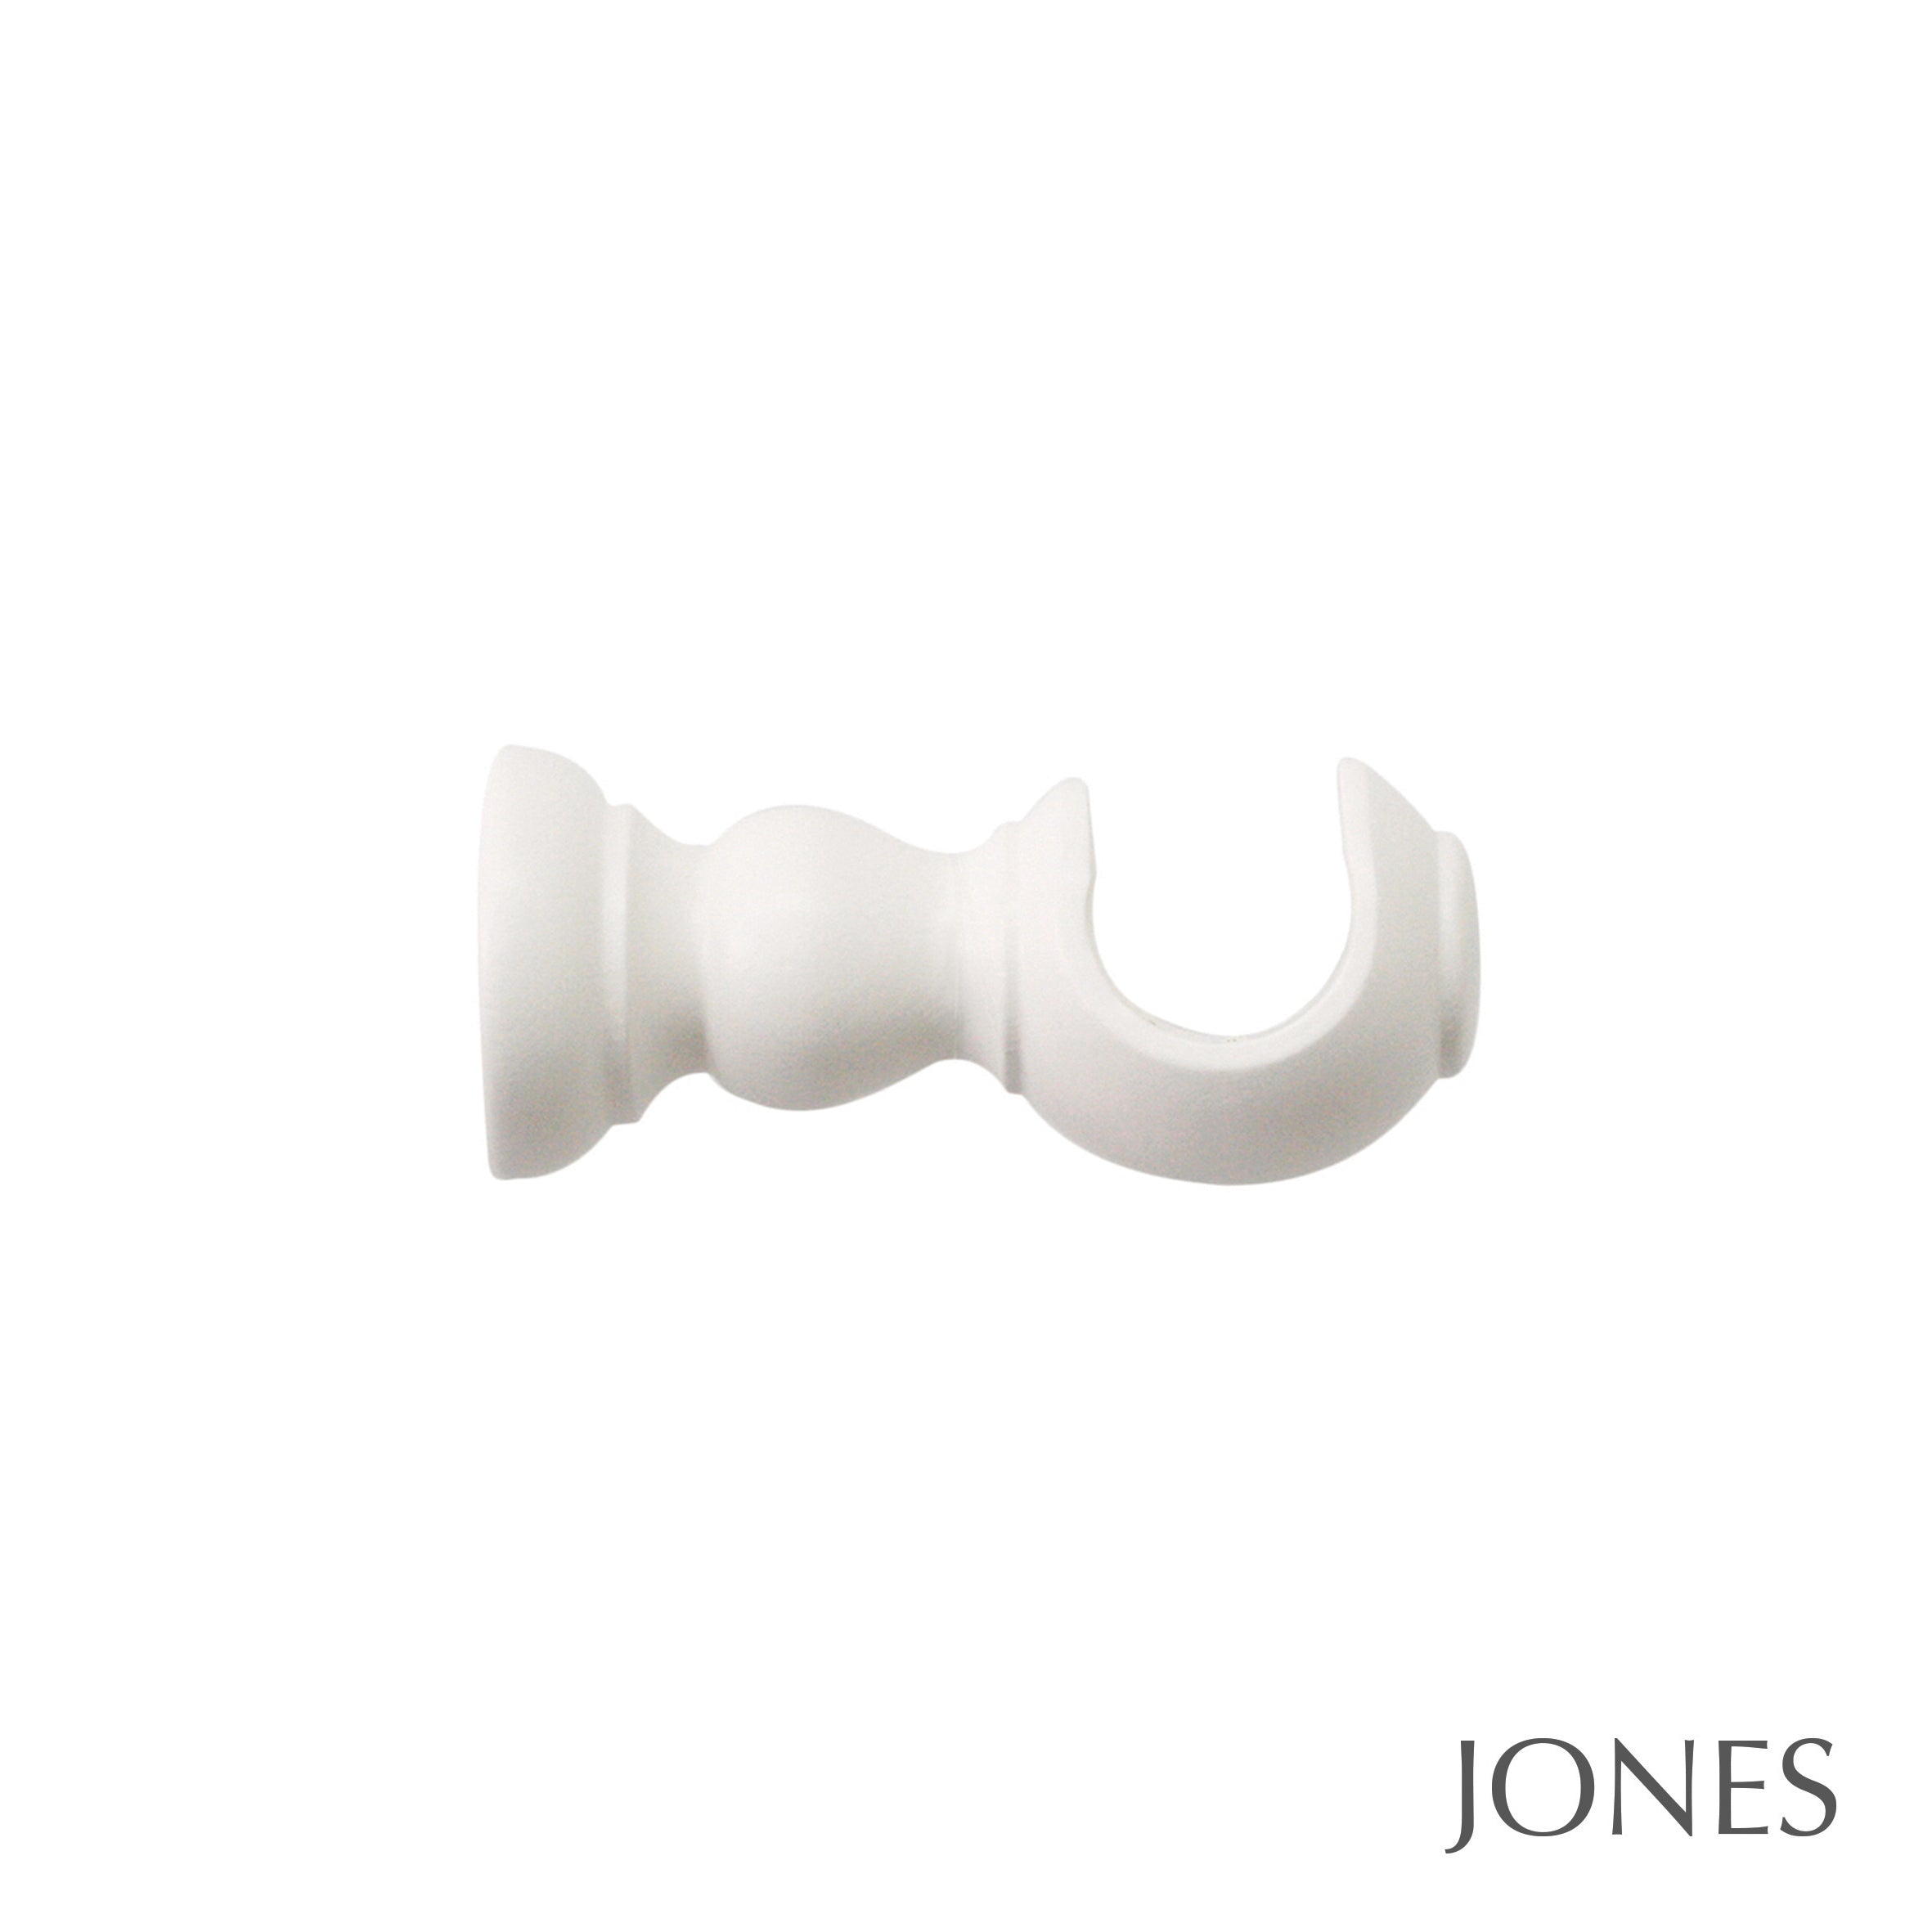 Jones Interiors Cathedral Wells Finial Curtain Pole Set in Cotton